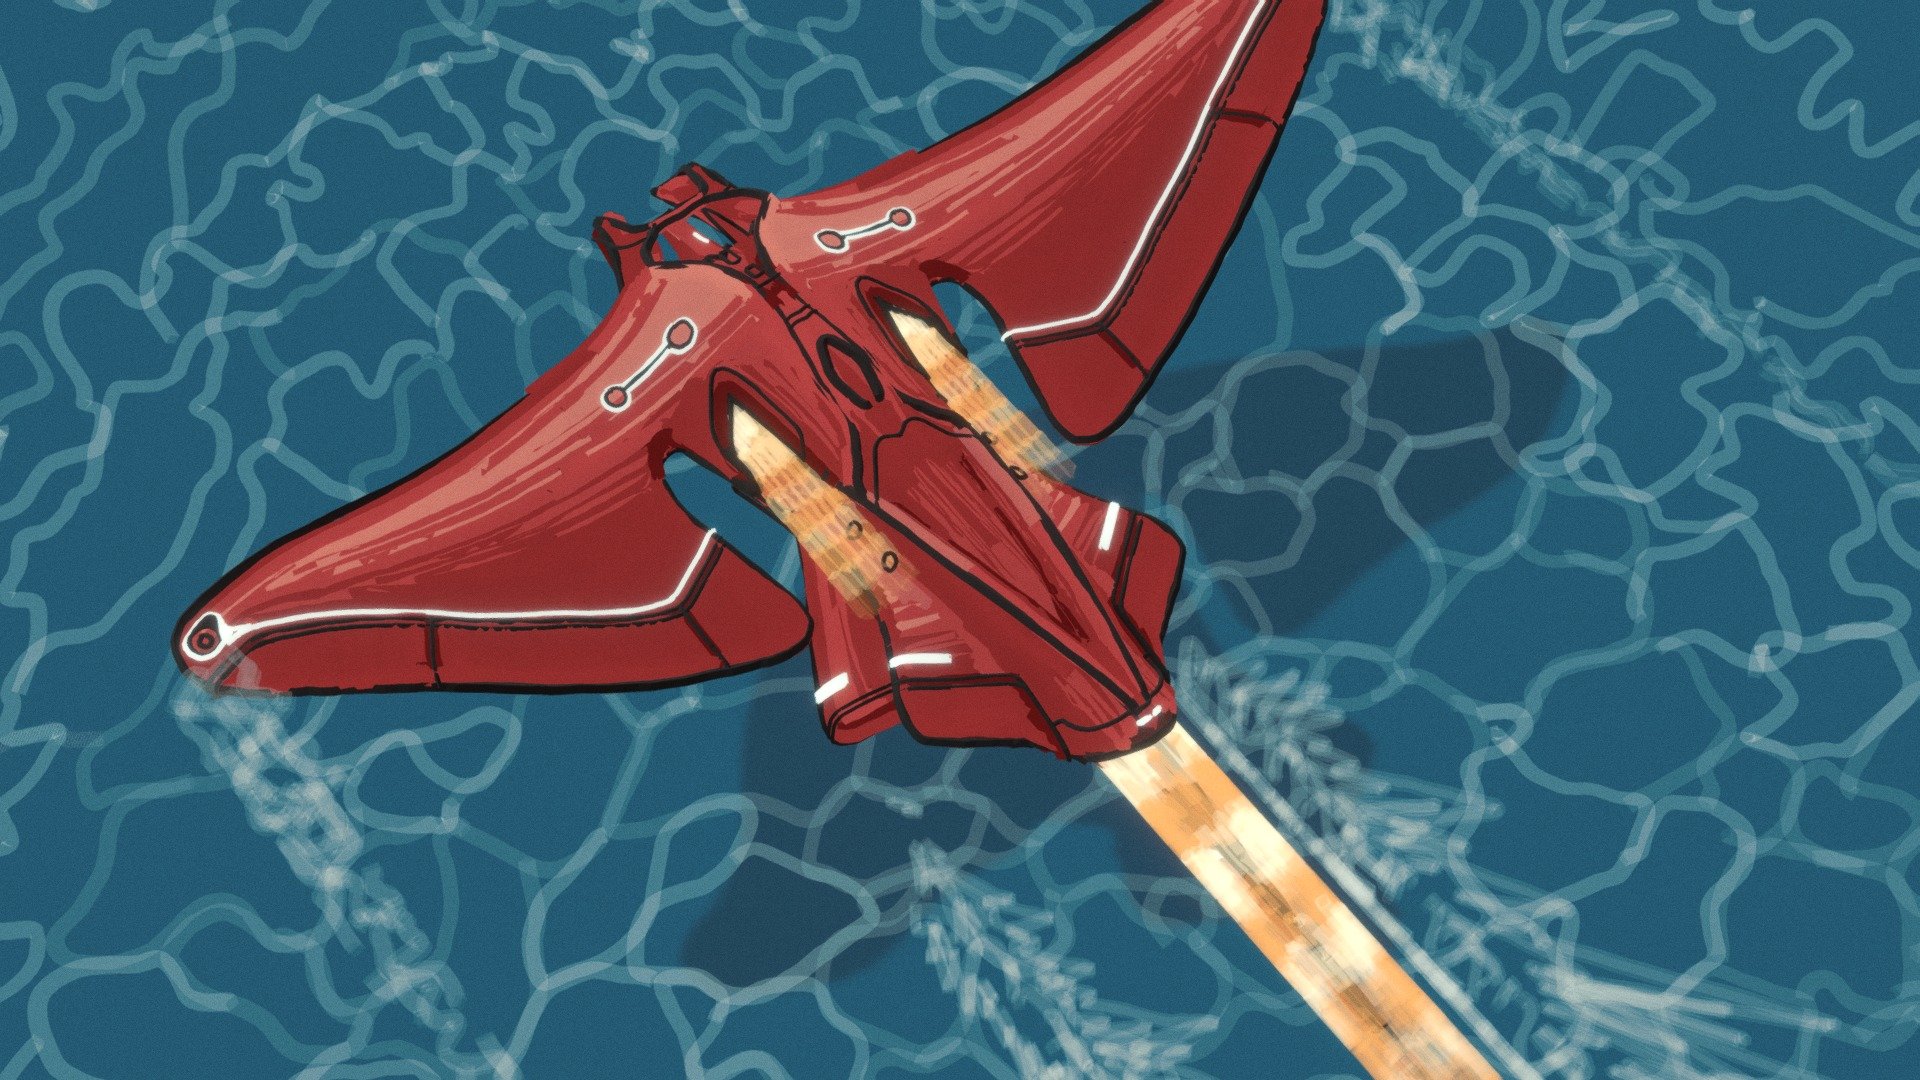 Fantasy aircraft resemble manta ray made with Feather

I tried to put a little Ghibli/Zelda-like style.

It was really fun to express spray and afterburner fire 3d model